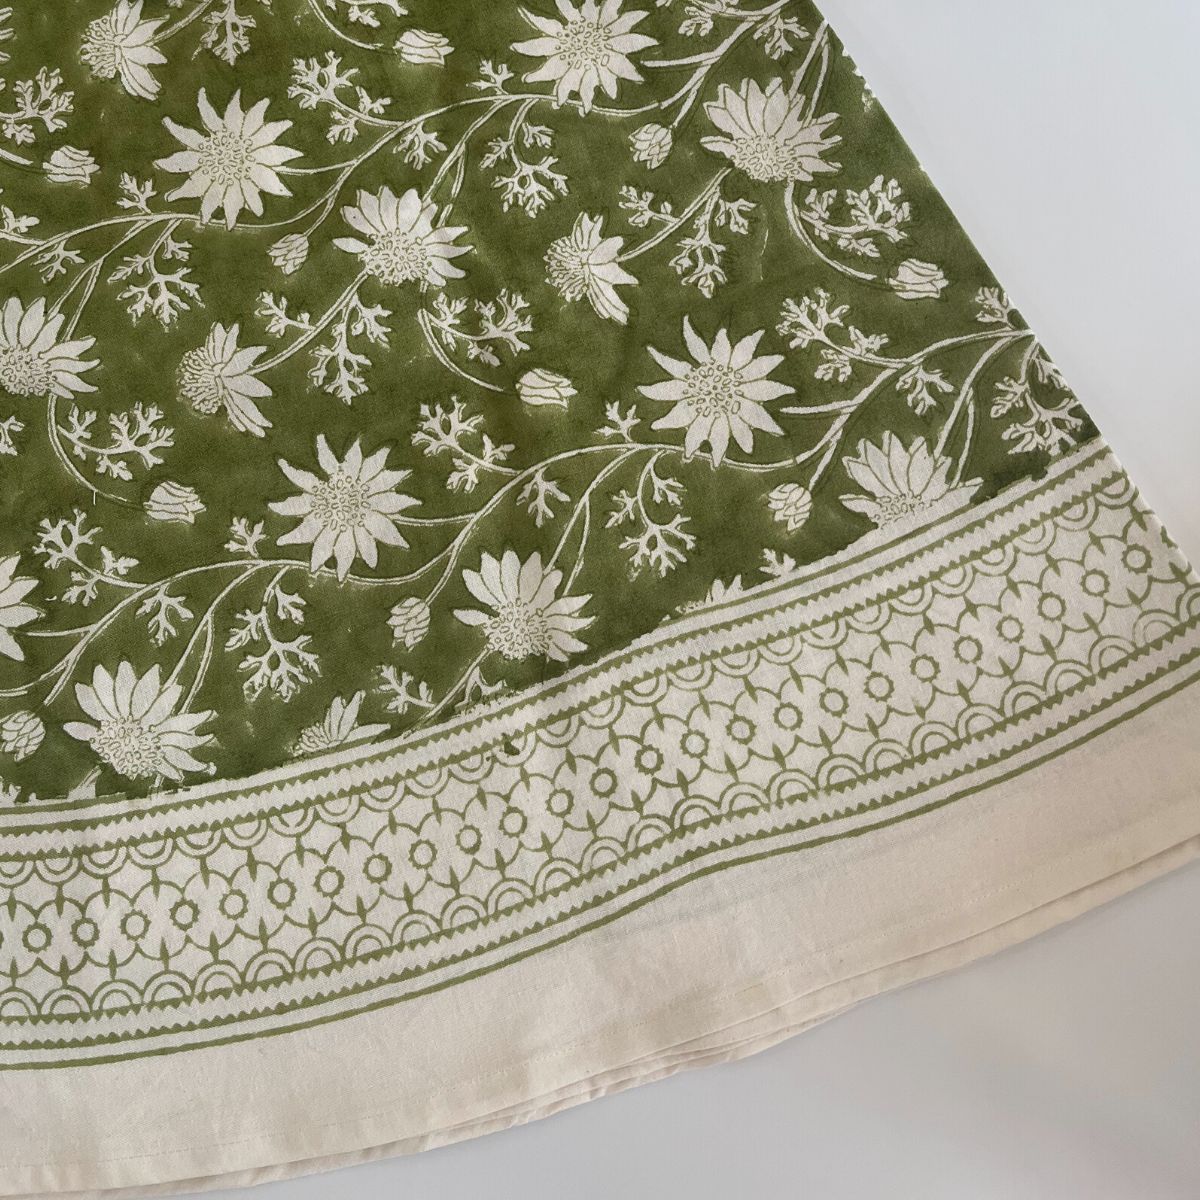 Flannel flower round tablecloth green ©